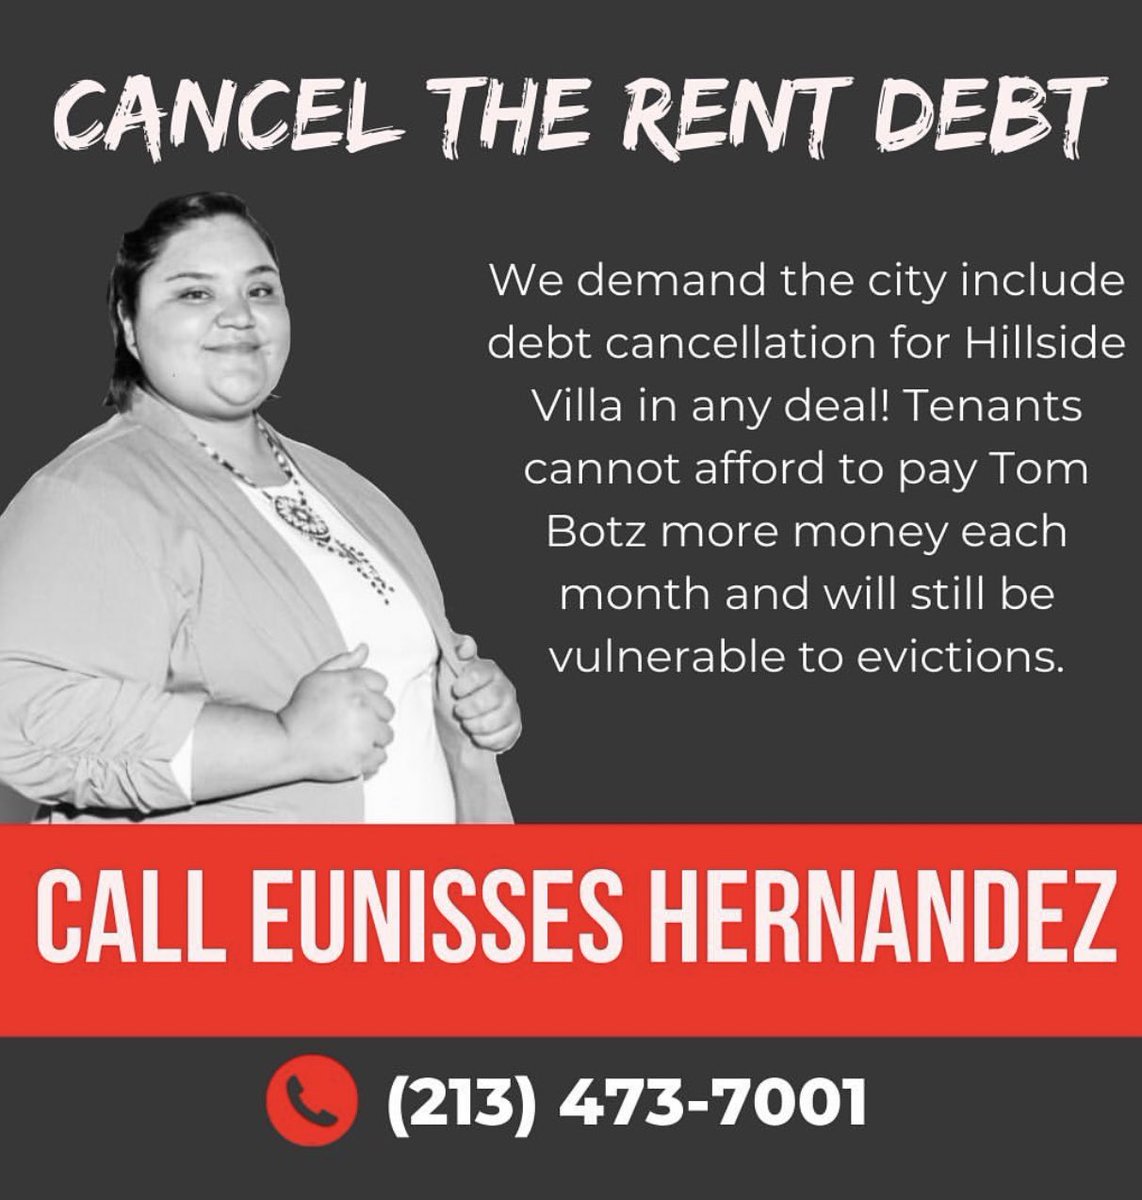 CALL TO ACTION 🚨 The city of LA is selling out @hillside_villa!! The city is forcing through a deal to leave tenants w/ $$$ in rent debt & vulnerable to eviction WE DEMAND the city guarantees there will be no rent debt for tenants Call (213) 473-7001 & (213) 473-7004 now!